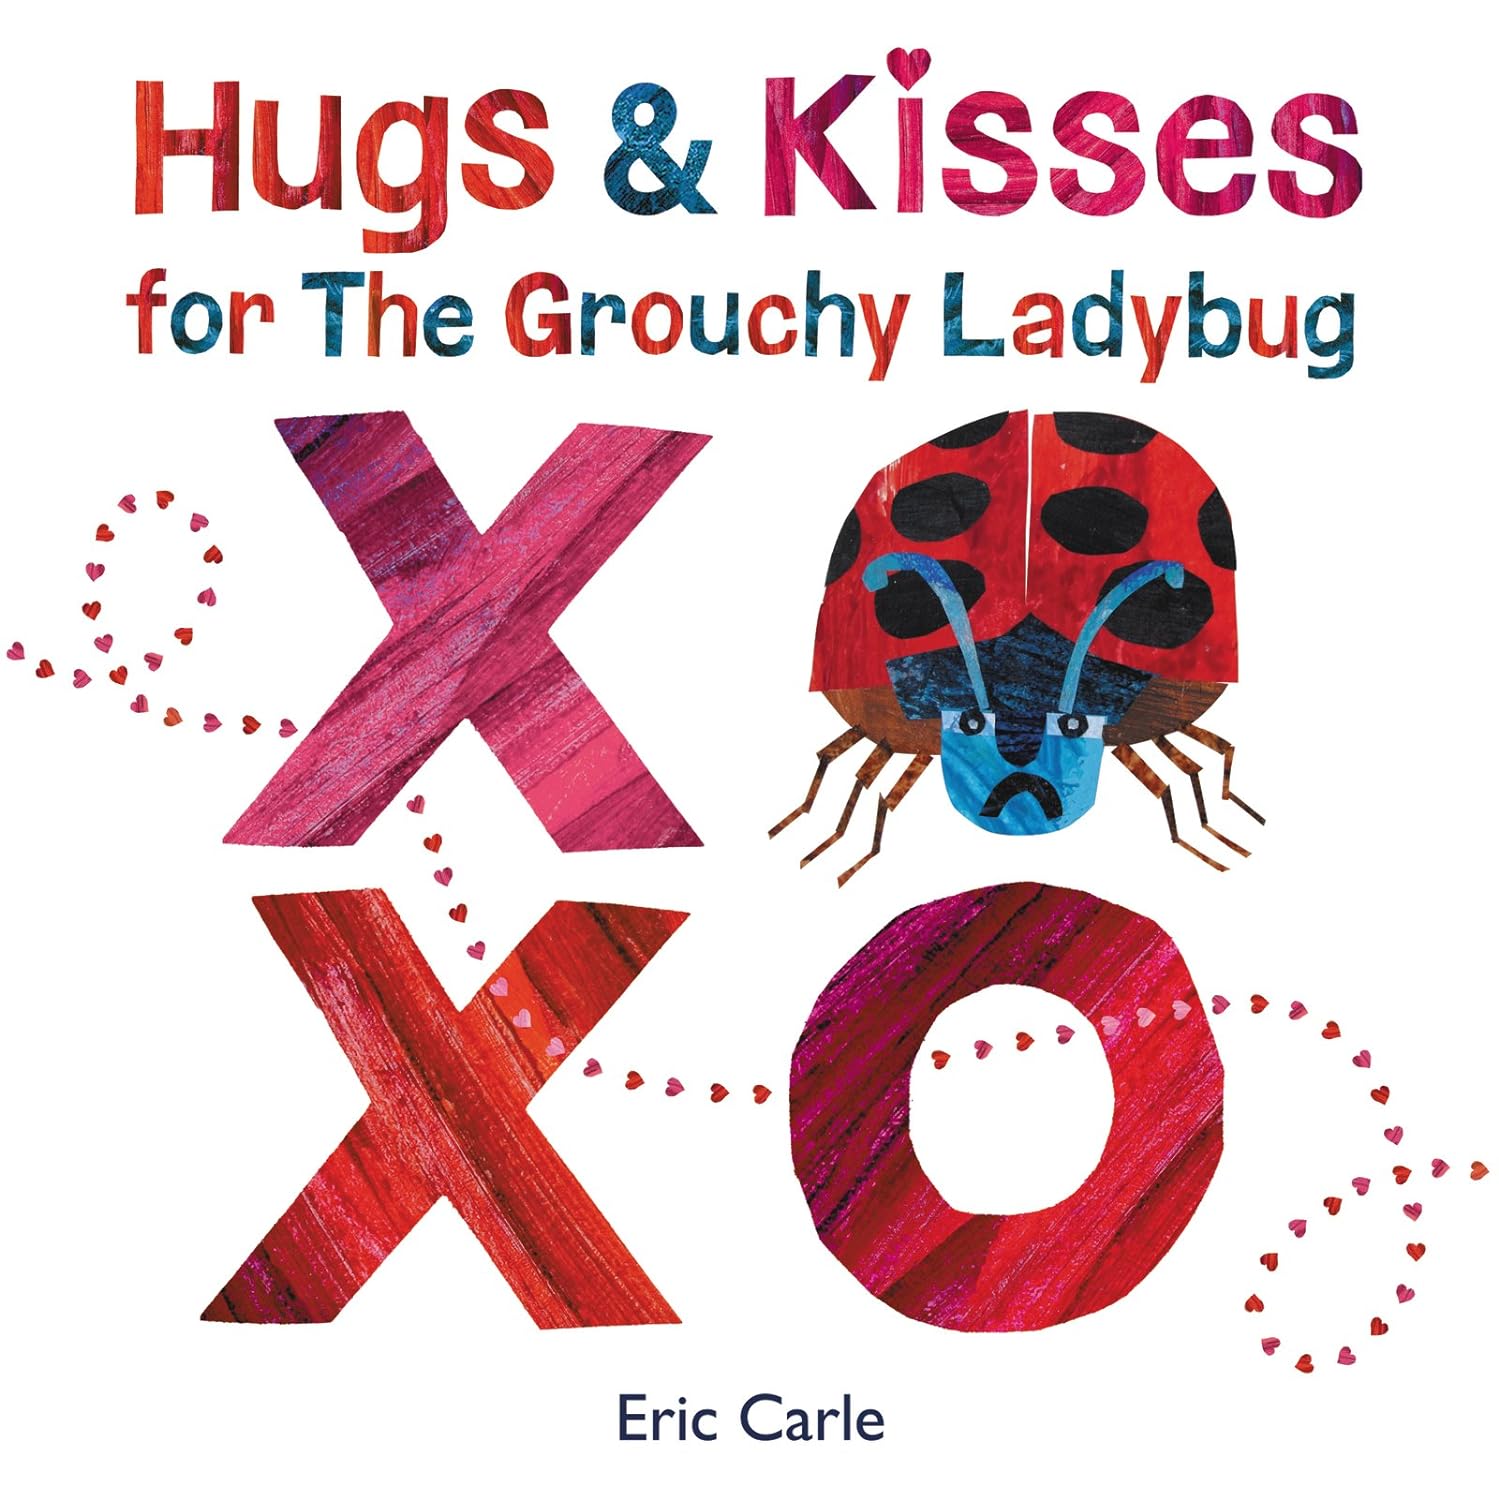 “Hugs and Kisses for the Grouchy Ladybug” by Eric Carle